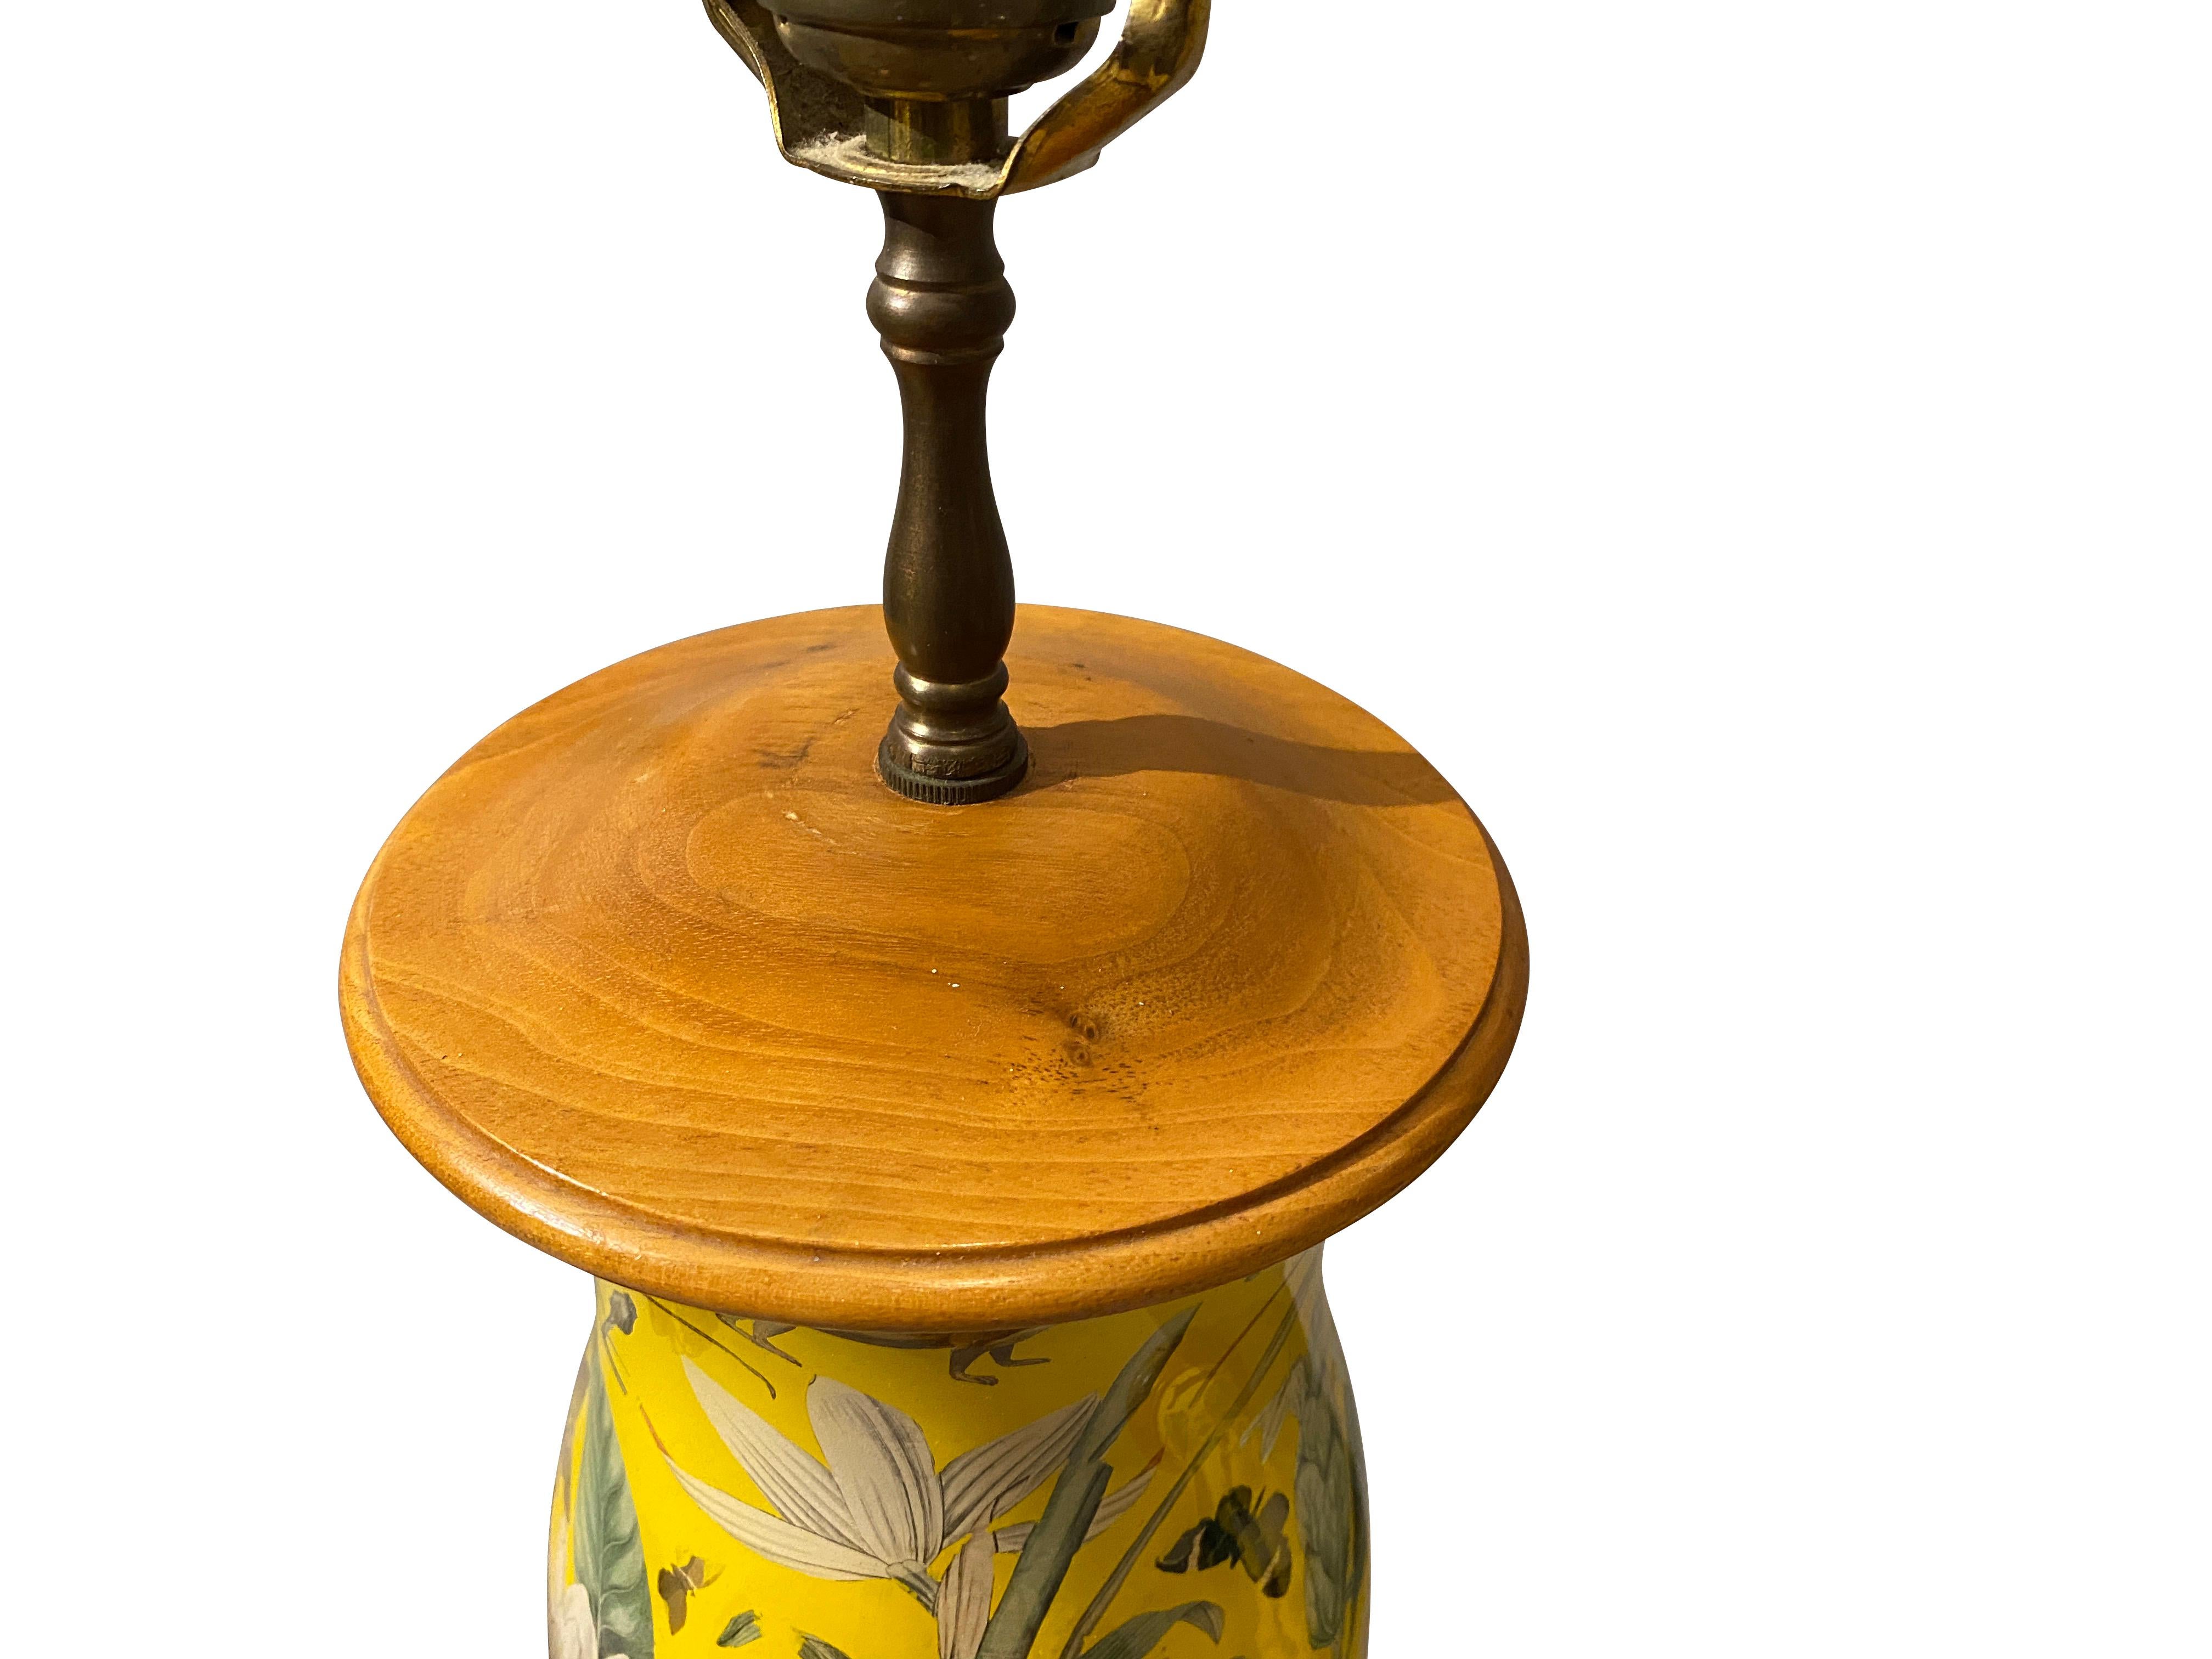 Hurricane shade form with wood fittings. Decorated with birds and animals on a bright yellow ground.